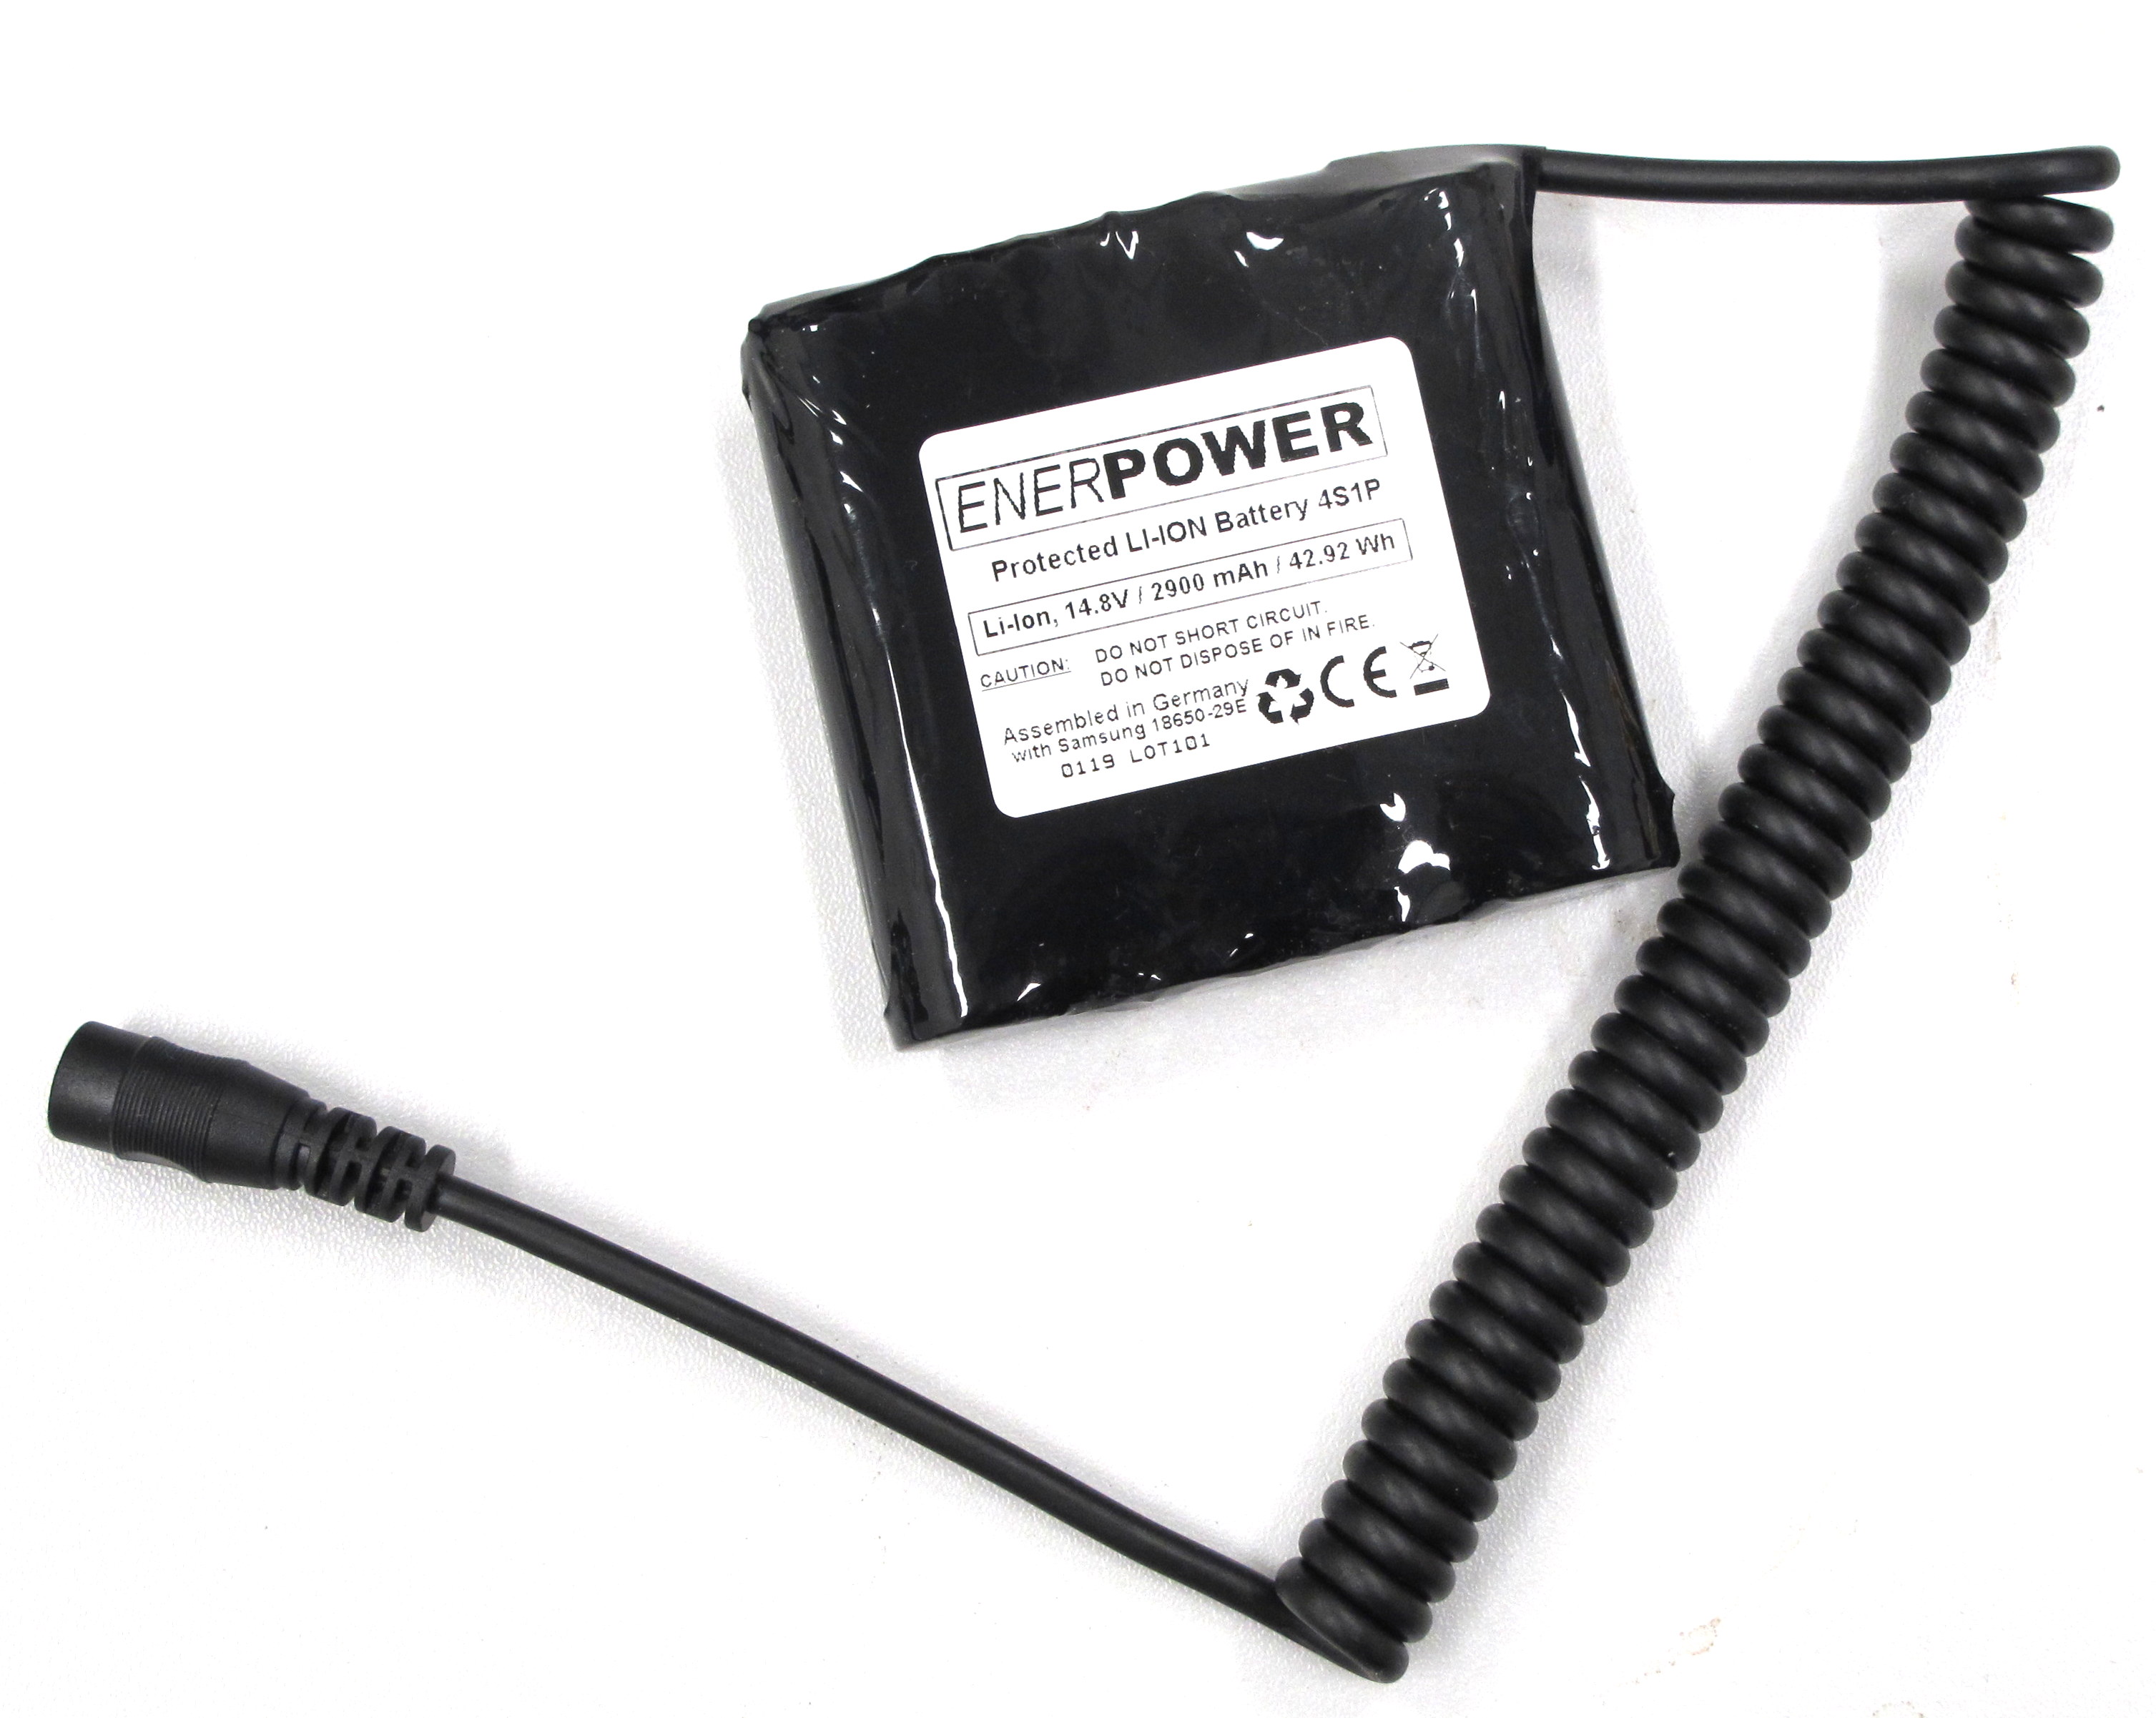 ENERpower 4S1P battery 14.4V-14.8V 2900 mAh Li-Ion with DC / Cable Open.-End 4x 1